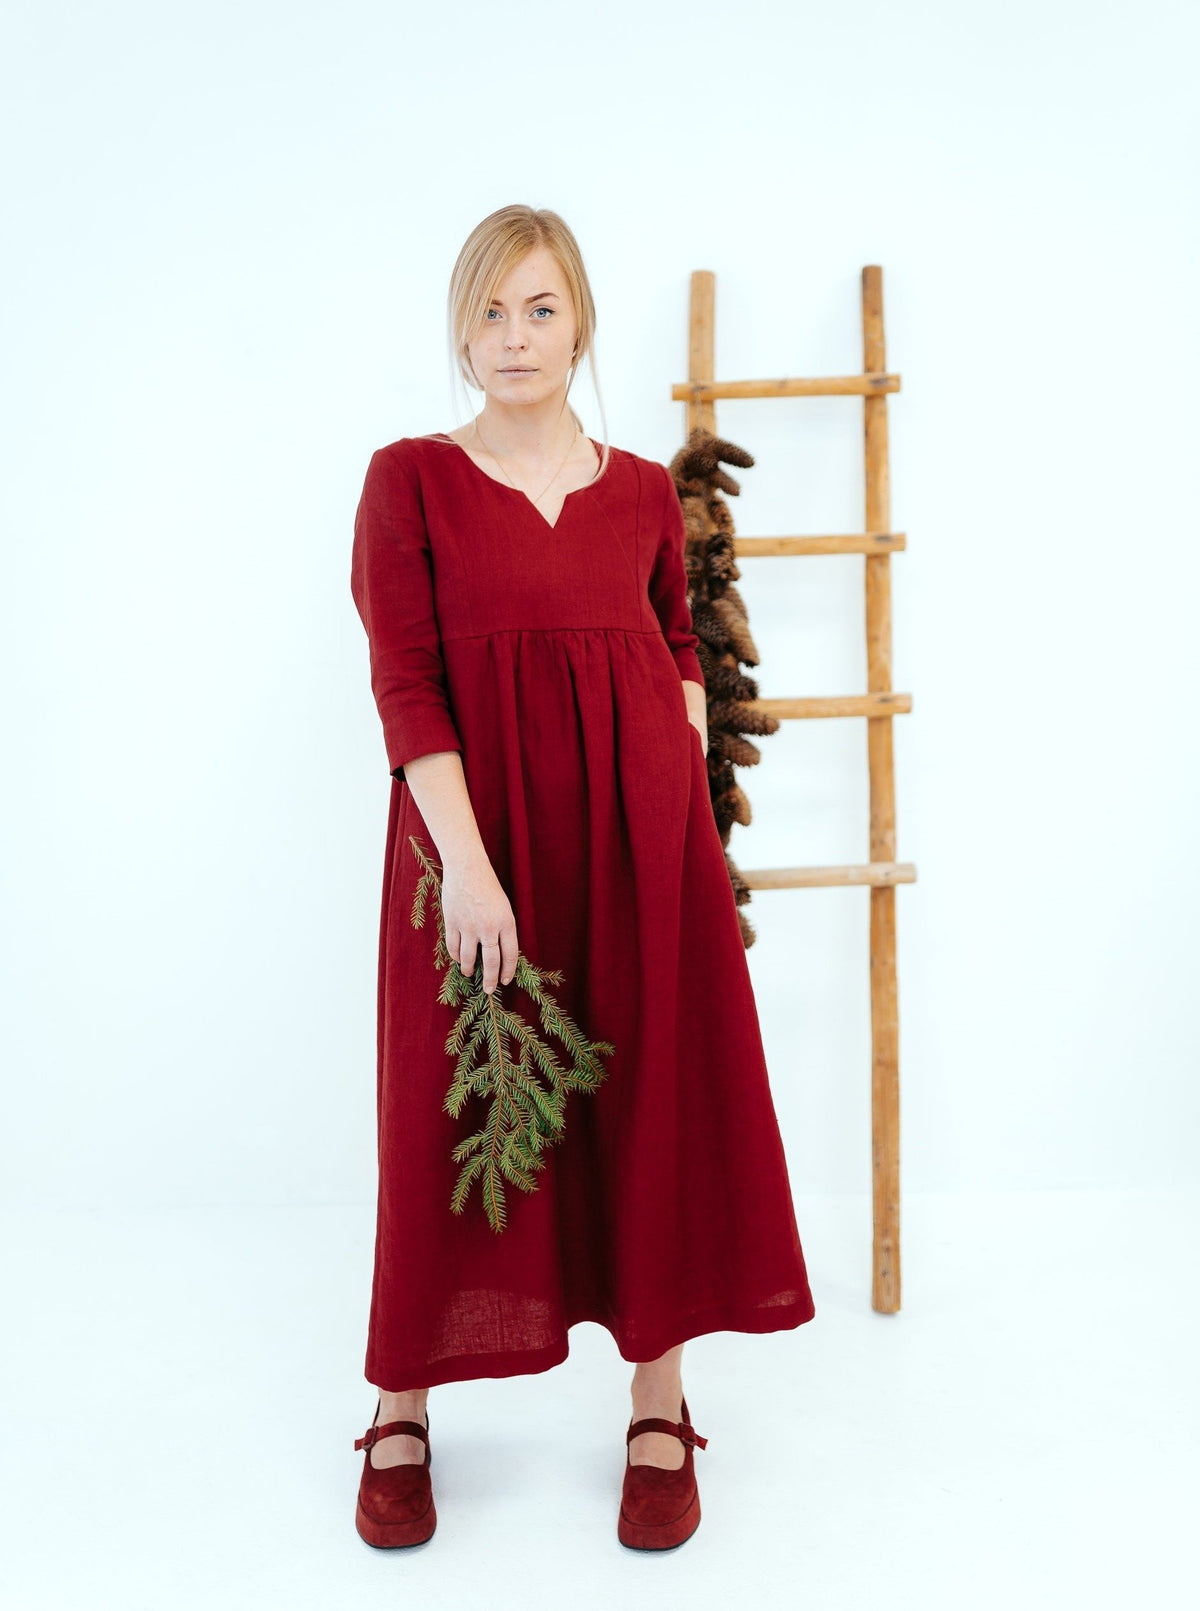 Oversized Linen Dress Comfy Sleeveless, Plus Size Sundress Available in 30  Colors, Linen Volume Soft Tunic. Women Clothing Mama Dress/ Tunic -   Sweden